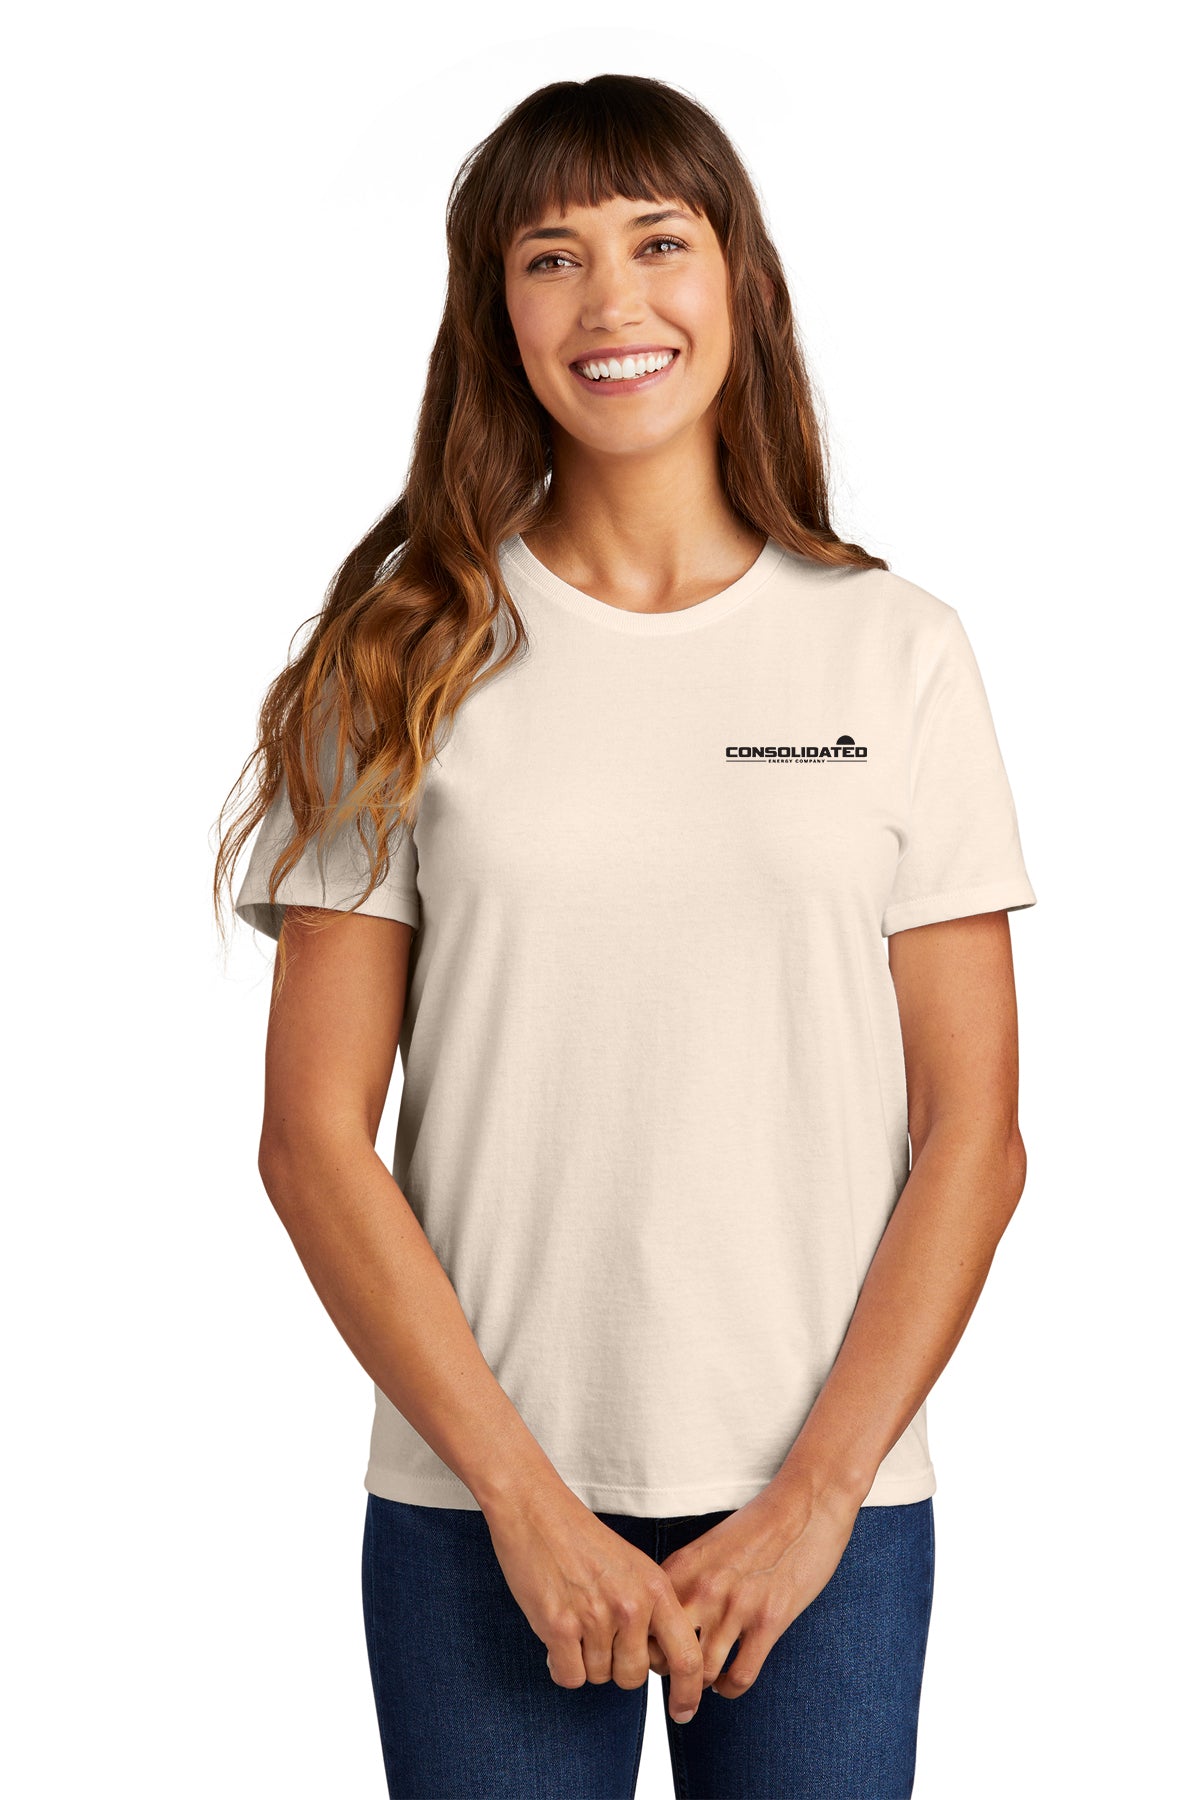 Consolidated Energy Ladies Tee – Multiple Colors